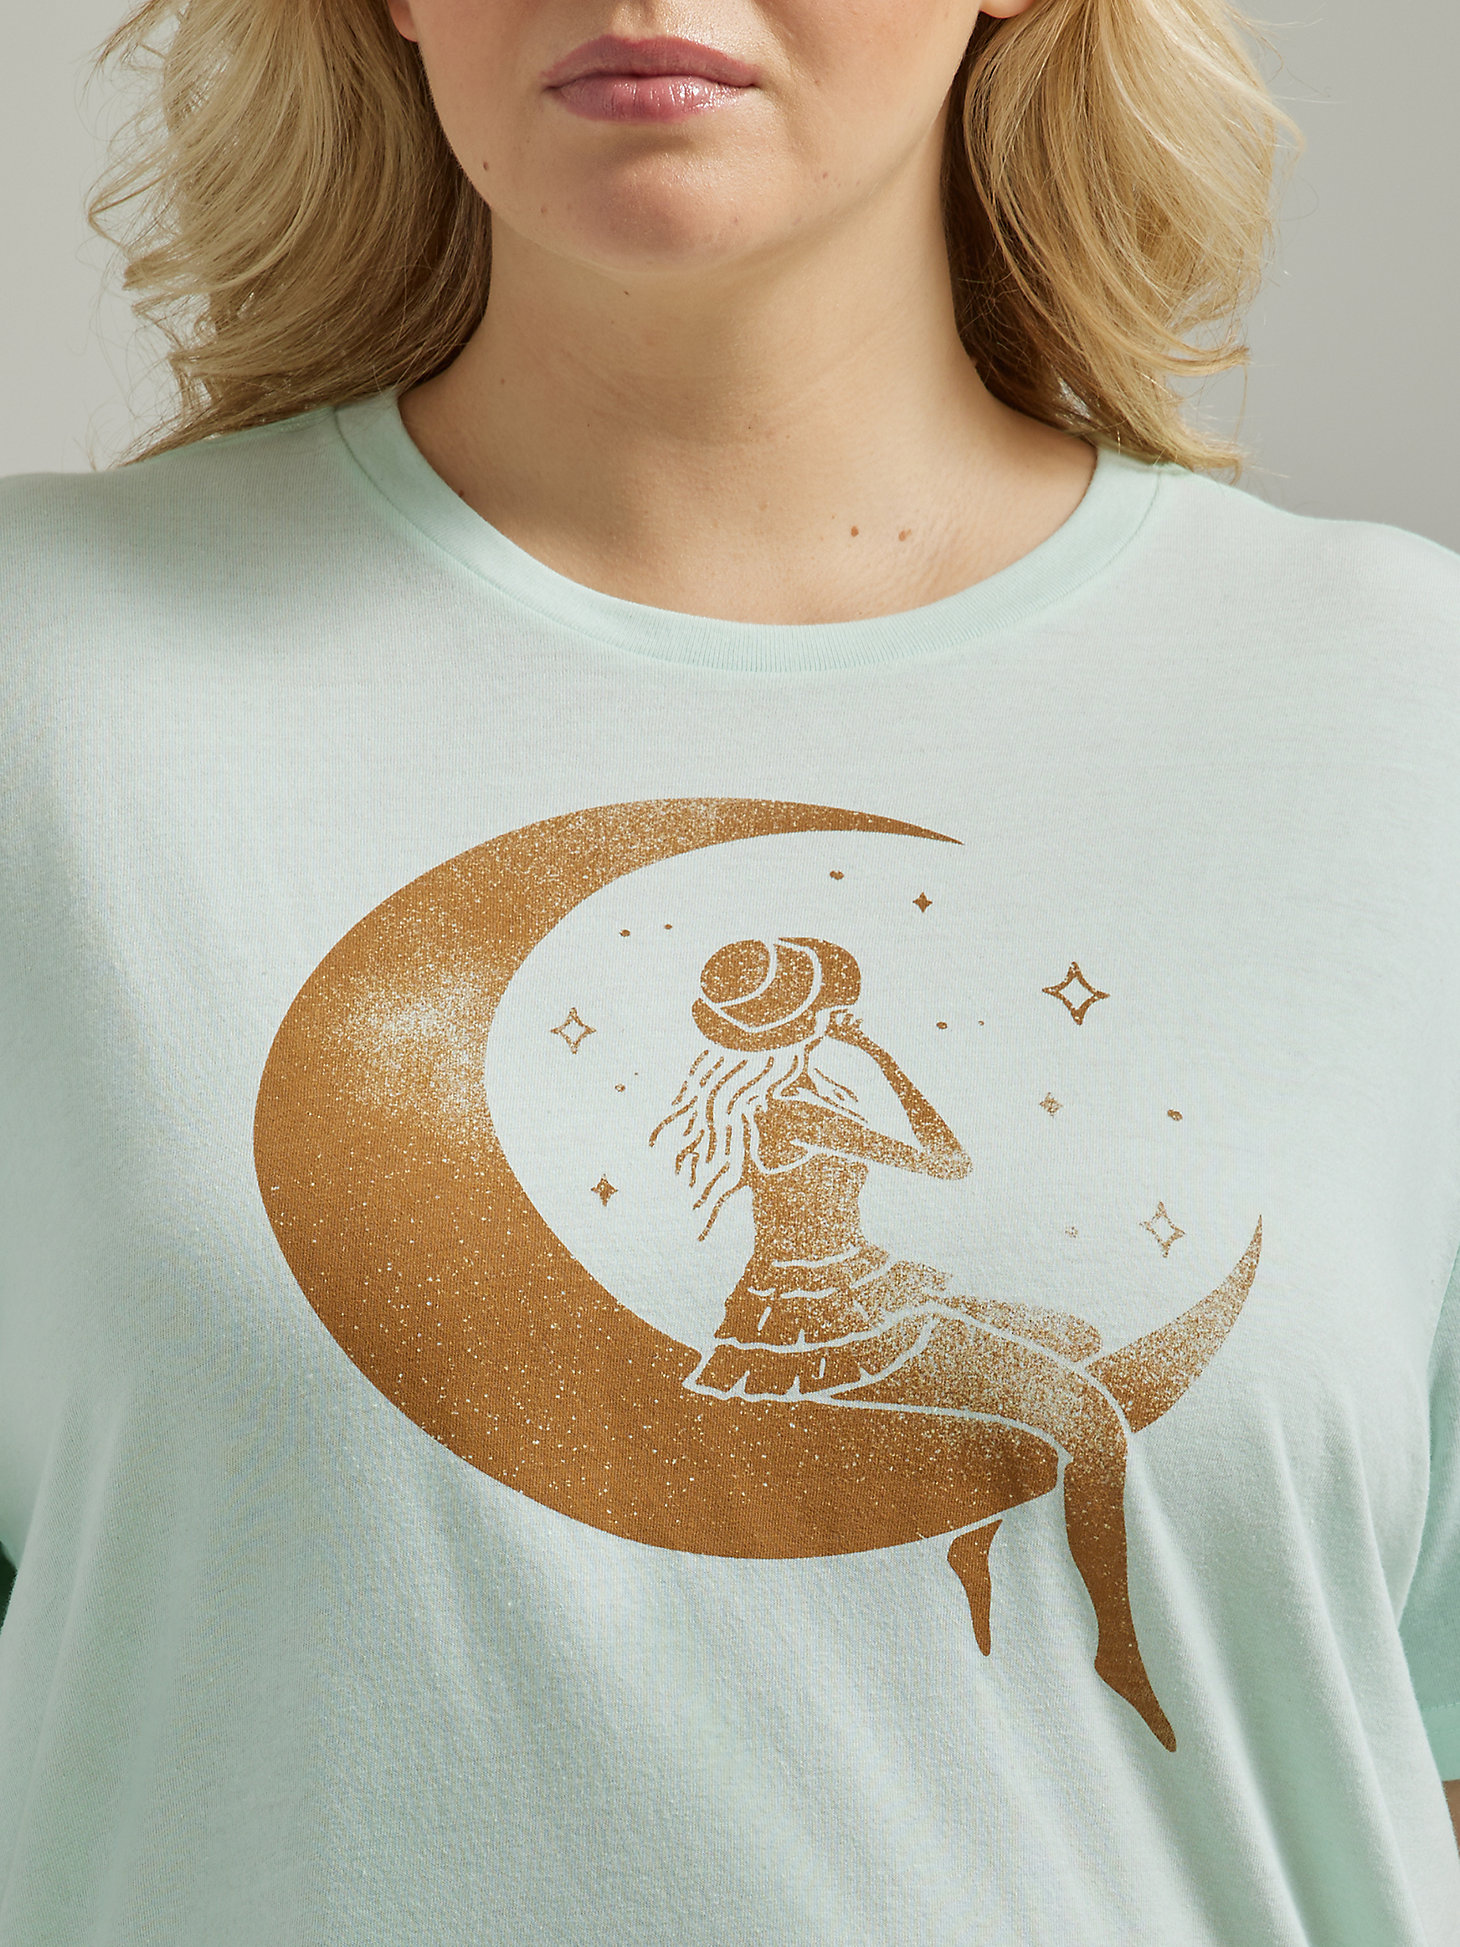 Women's Moon Lady Graphic Tee (Plus) in Seaglass alternative view 2